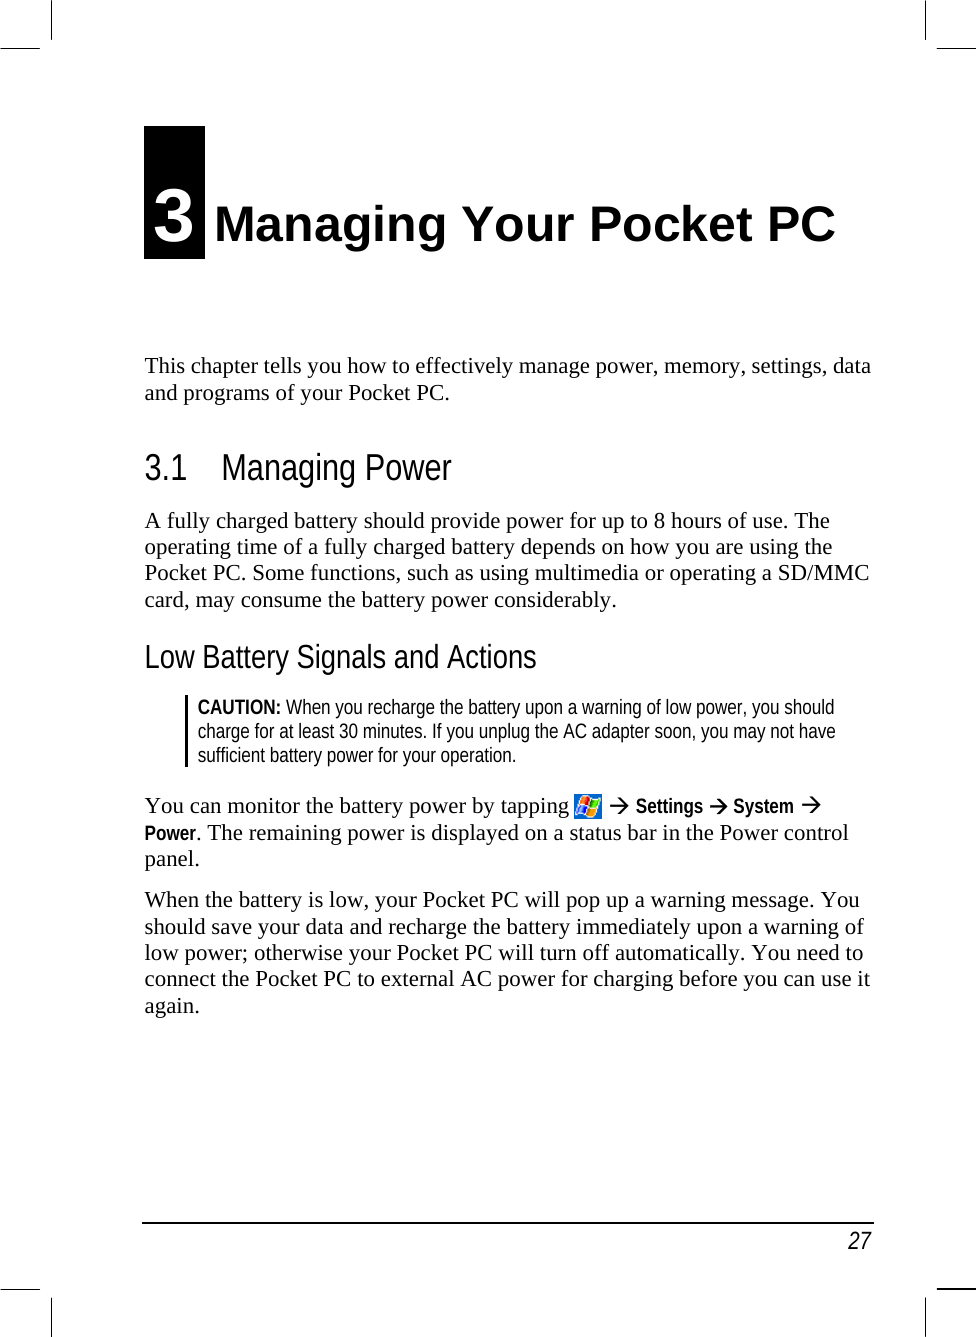   27 3 Managing Your Pocket PC This chapter tells you how to effectively manage power, memory, settings, data and programs of your Pocket PC. 3.1 Managing Power A fully charged battery should provide power for up to 8 hours of use. The operating time of a fully charged battery depends on how you are using the Pocket PC. Some functions, such as using multimedia or operating a SD/MMC card, may consume the battery power considerably. Low Battery Signals and Actions CAUTION: When you recharge the battery upon a warning of low power, you should charge for at least 30 minutes. If you unplug the AC adapter soon, you may not have sufficient battery power for your operation.  You can monitor the battery power by tapping    Settings  System  Power. The remaining power is displayed on a status bar in the Power control panel. When the battery is low, your Pocket PC will pop up a warning message. You should save your data and recharge the battery immediately upon a warning of low power; otherwise your Pocket PC will turn off automatically. You need to connect the Pocket PC to external AC power for charging before you can use it again.    